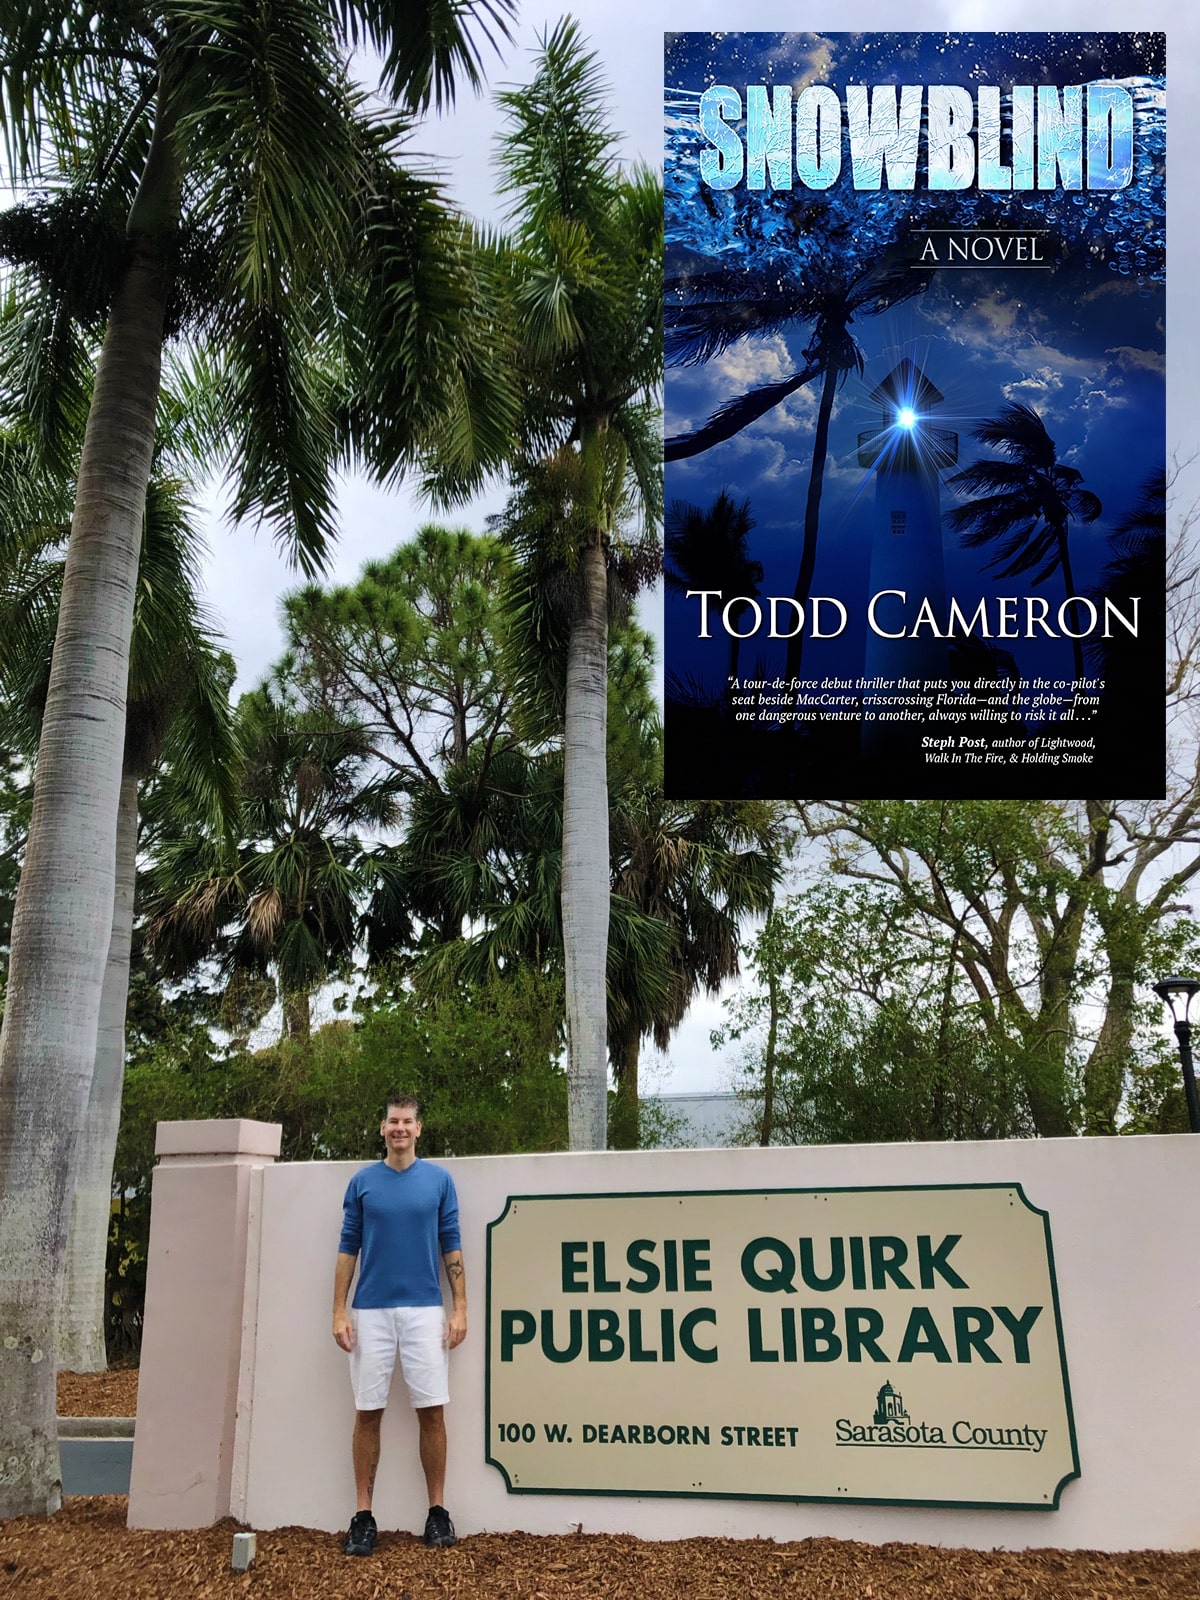 Todd Cameron in front of Elsie Quirk Library and cover of novel "Snowblind"